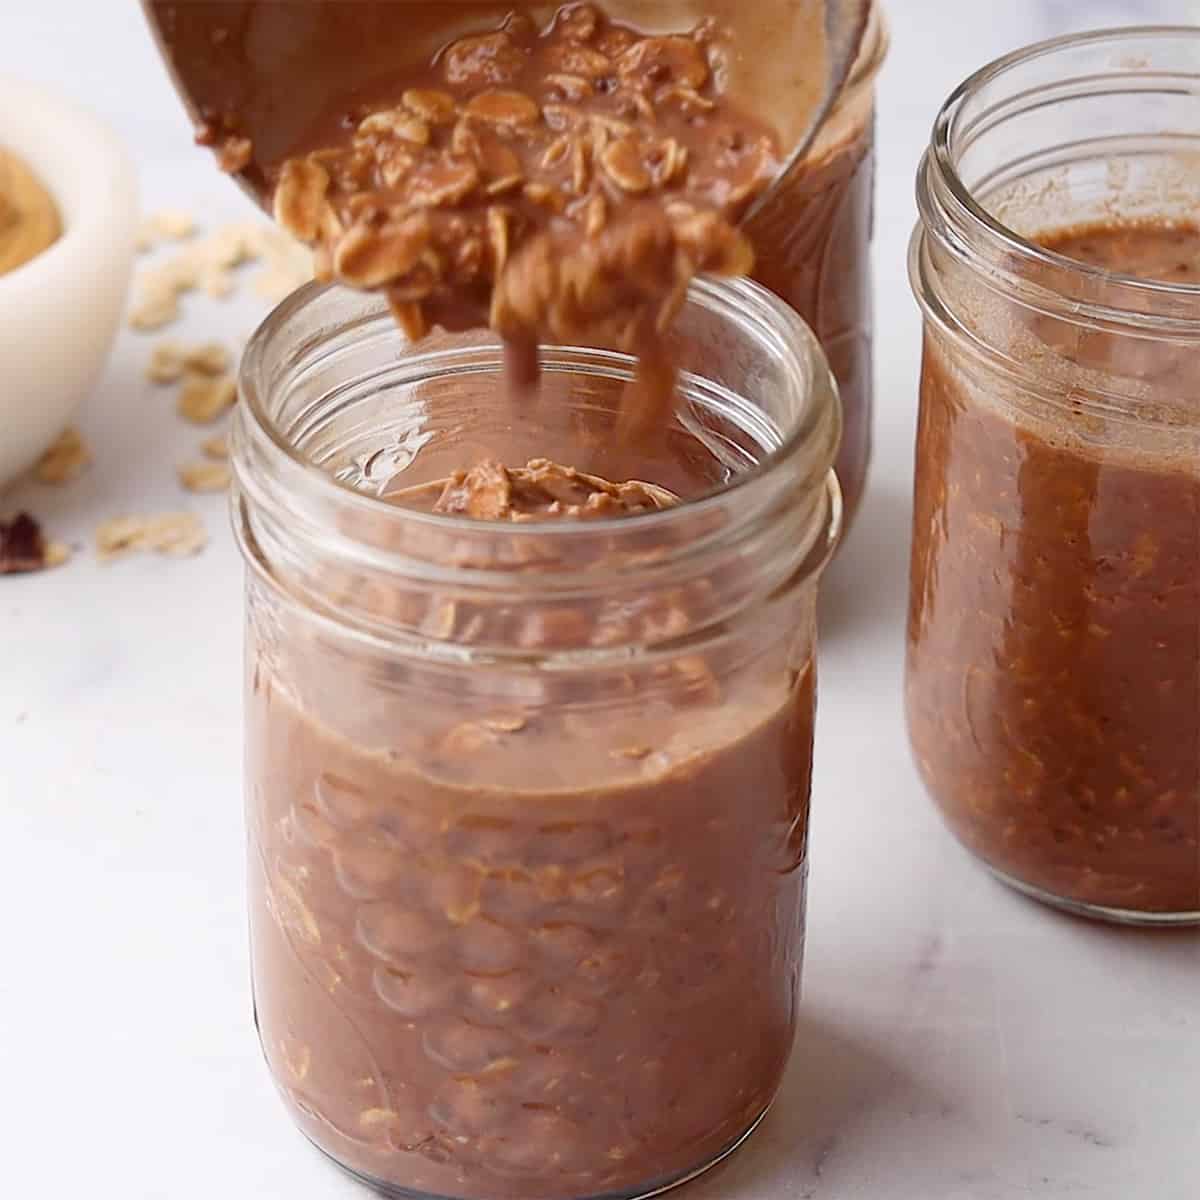 Chocolate Peanut Butter Overnight Oats being poured into glass jars